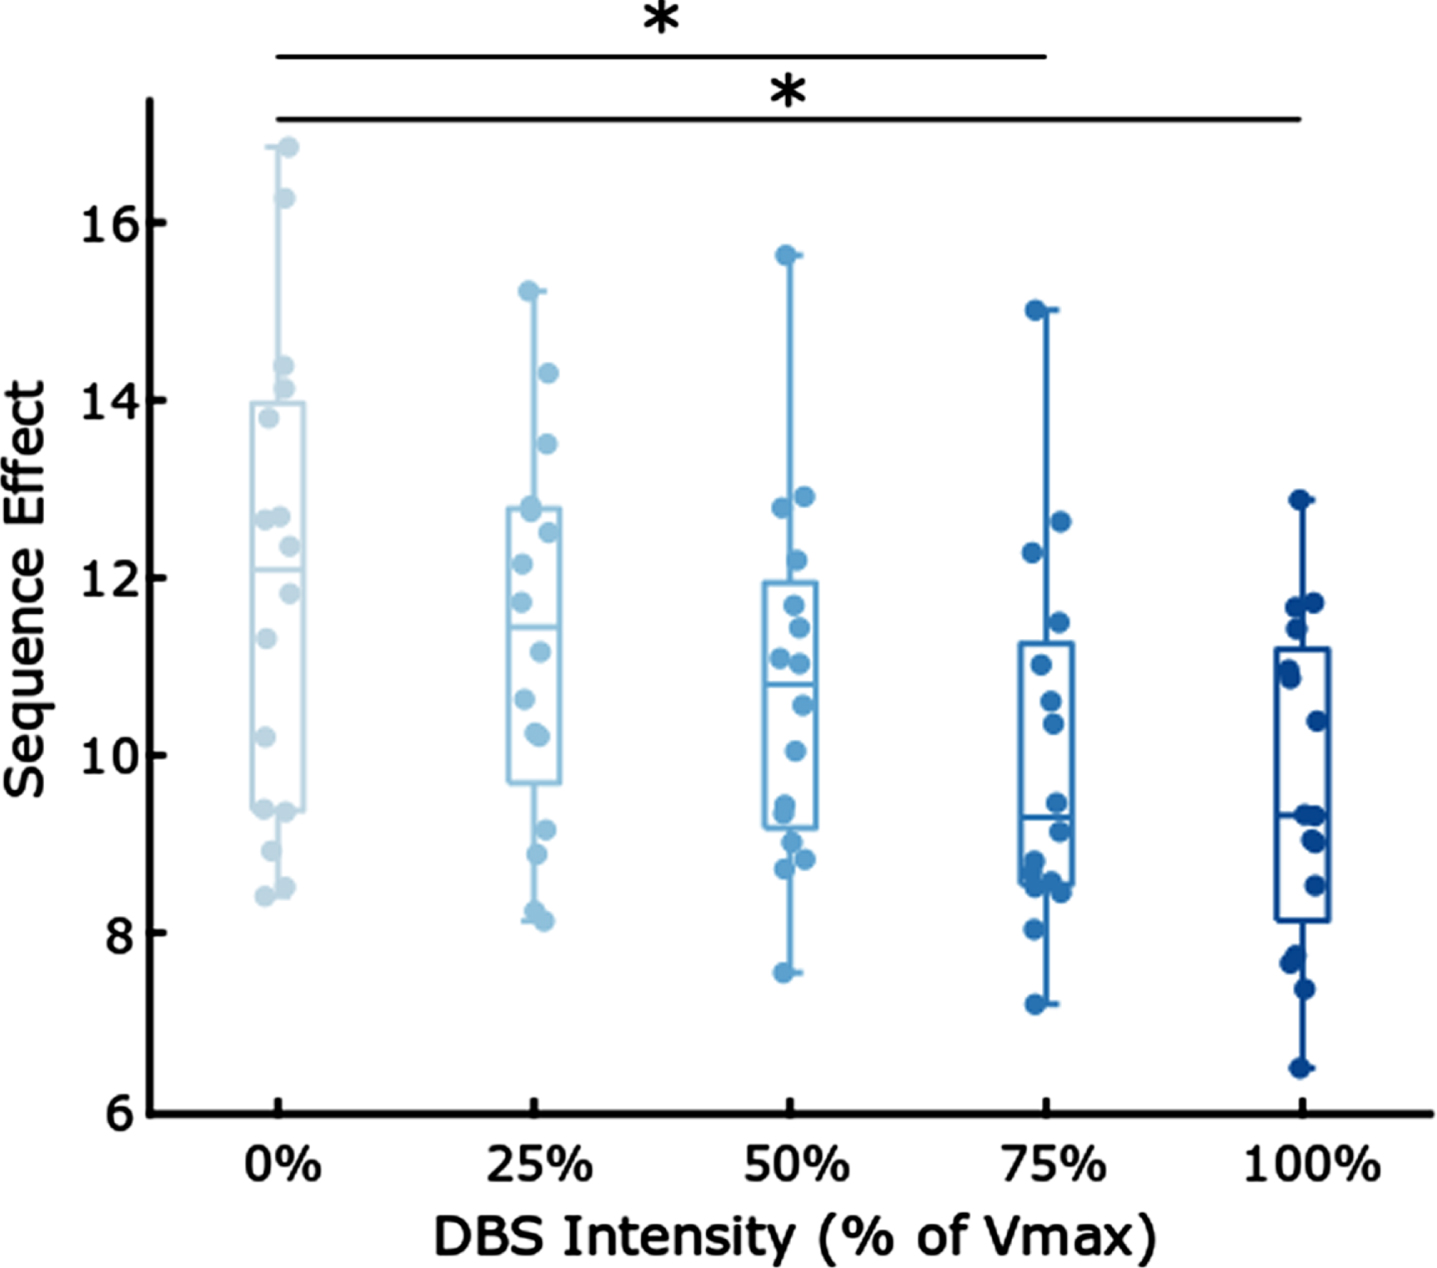 Boxplots comparing the sequence effect at different intensities of DBS. * indicates p < 0.05, Bonferroni corrected.